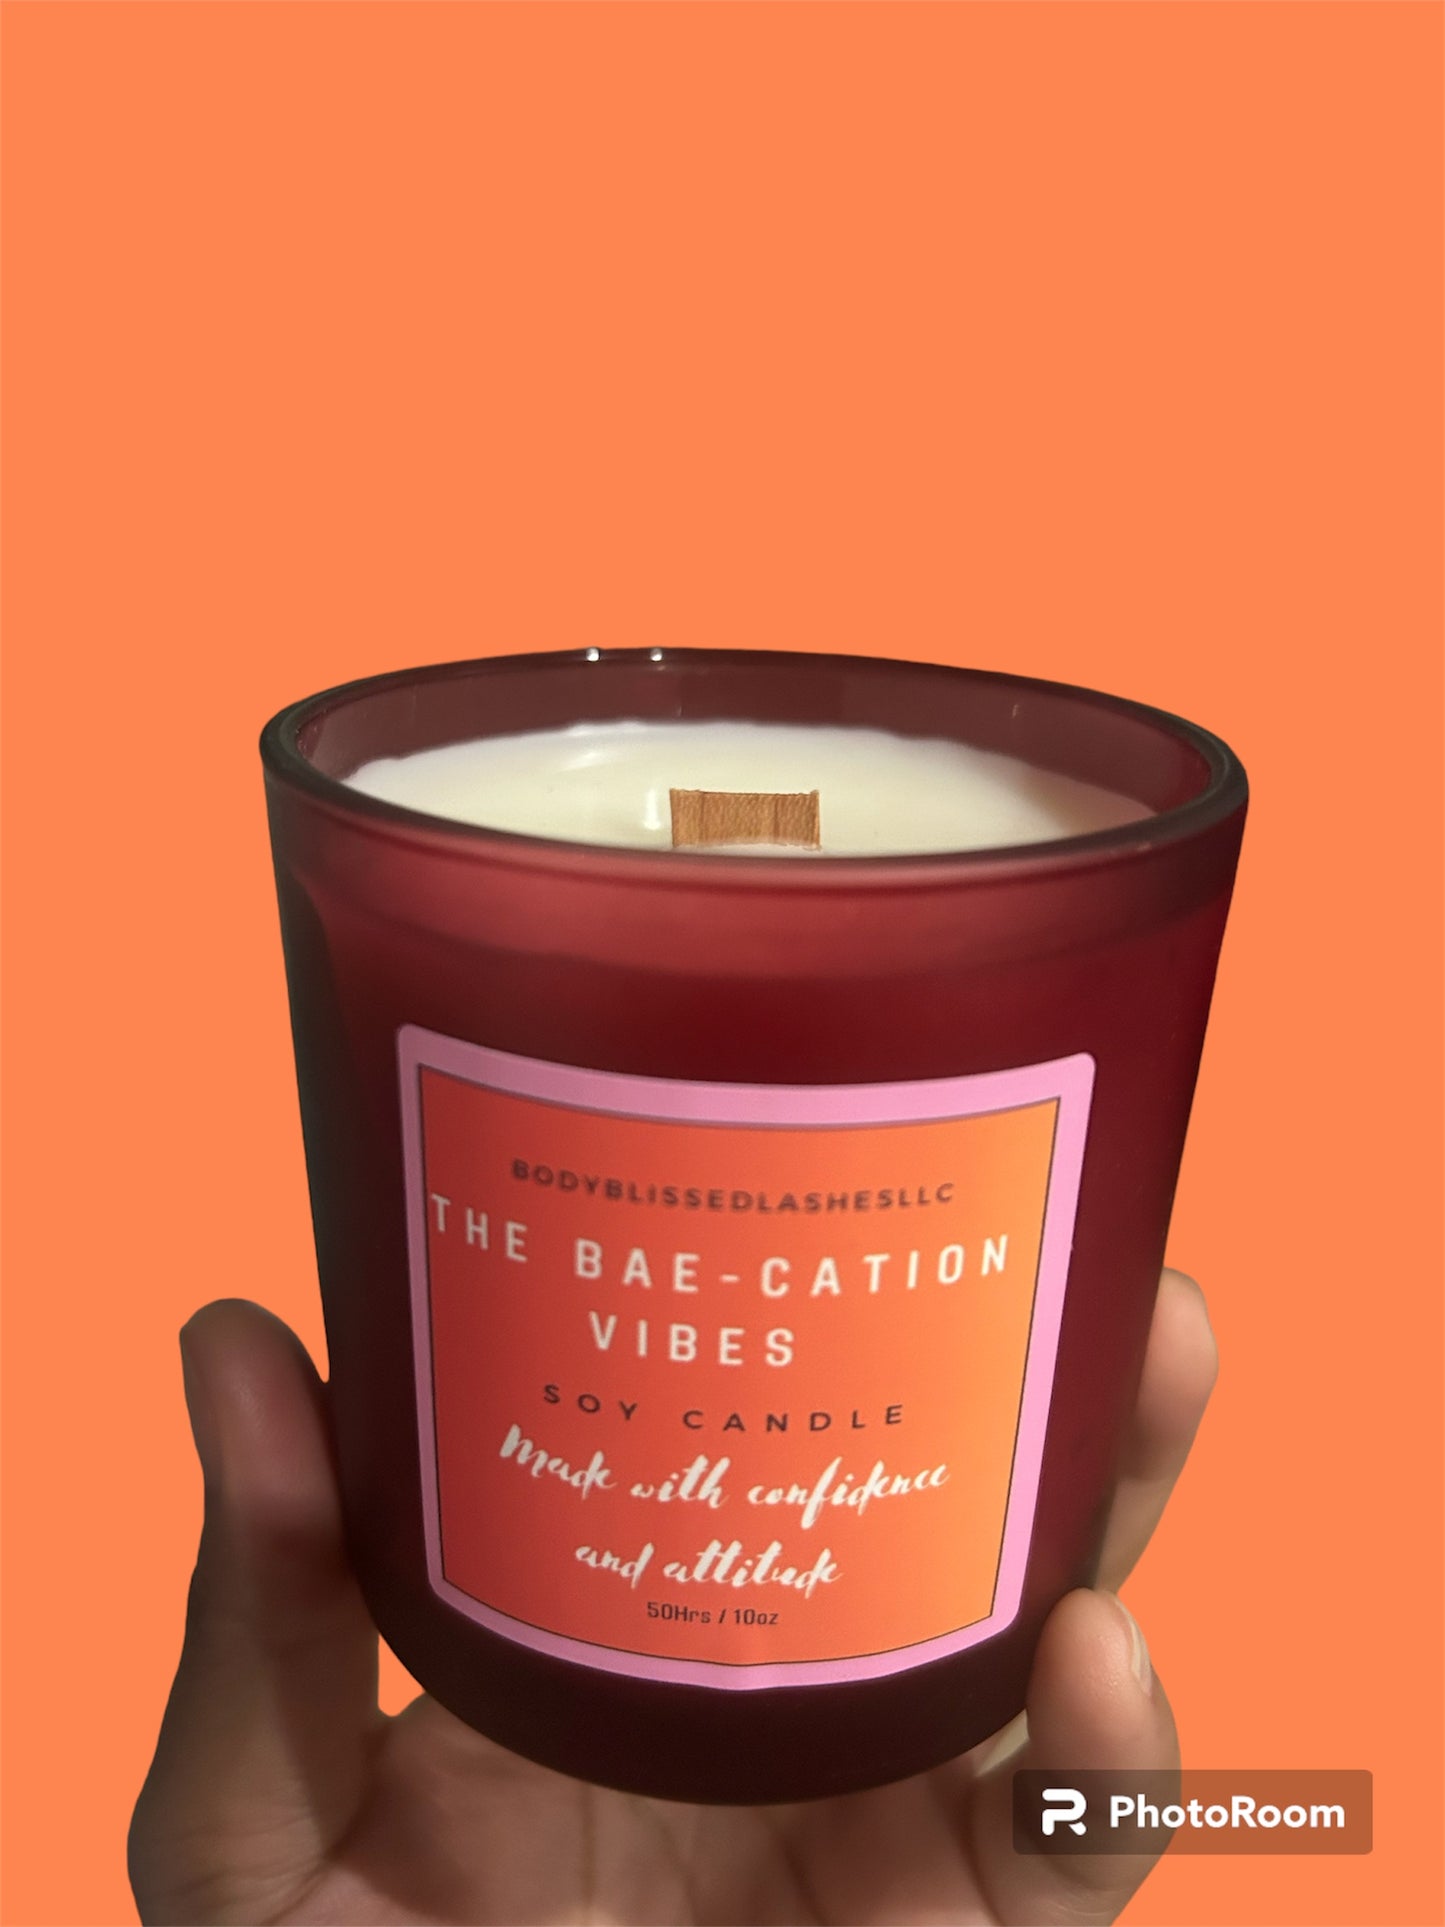 The Bae-cation Vibes Candle